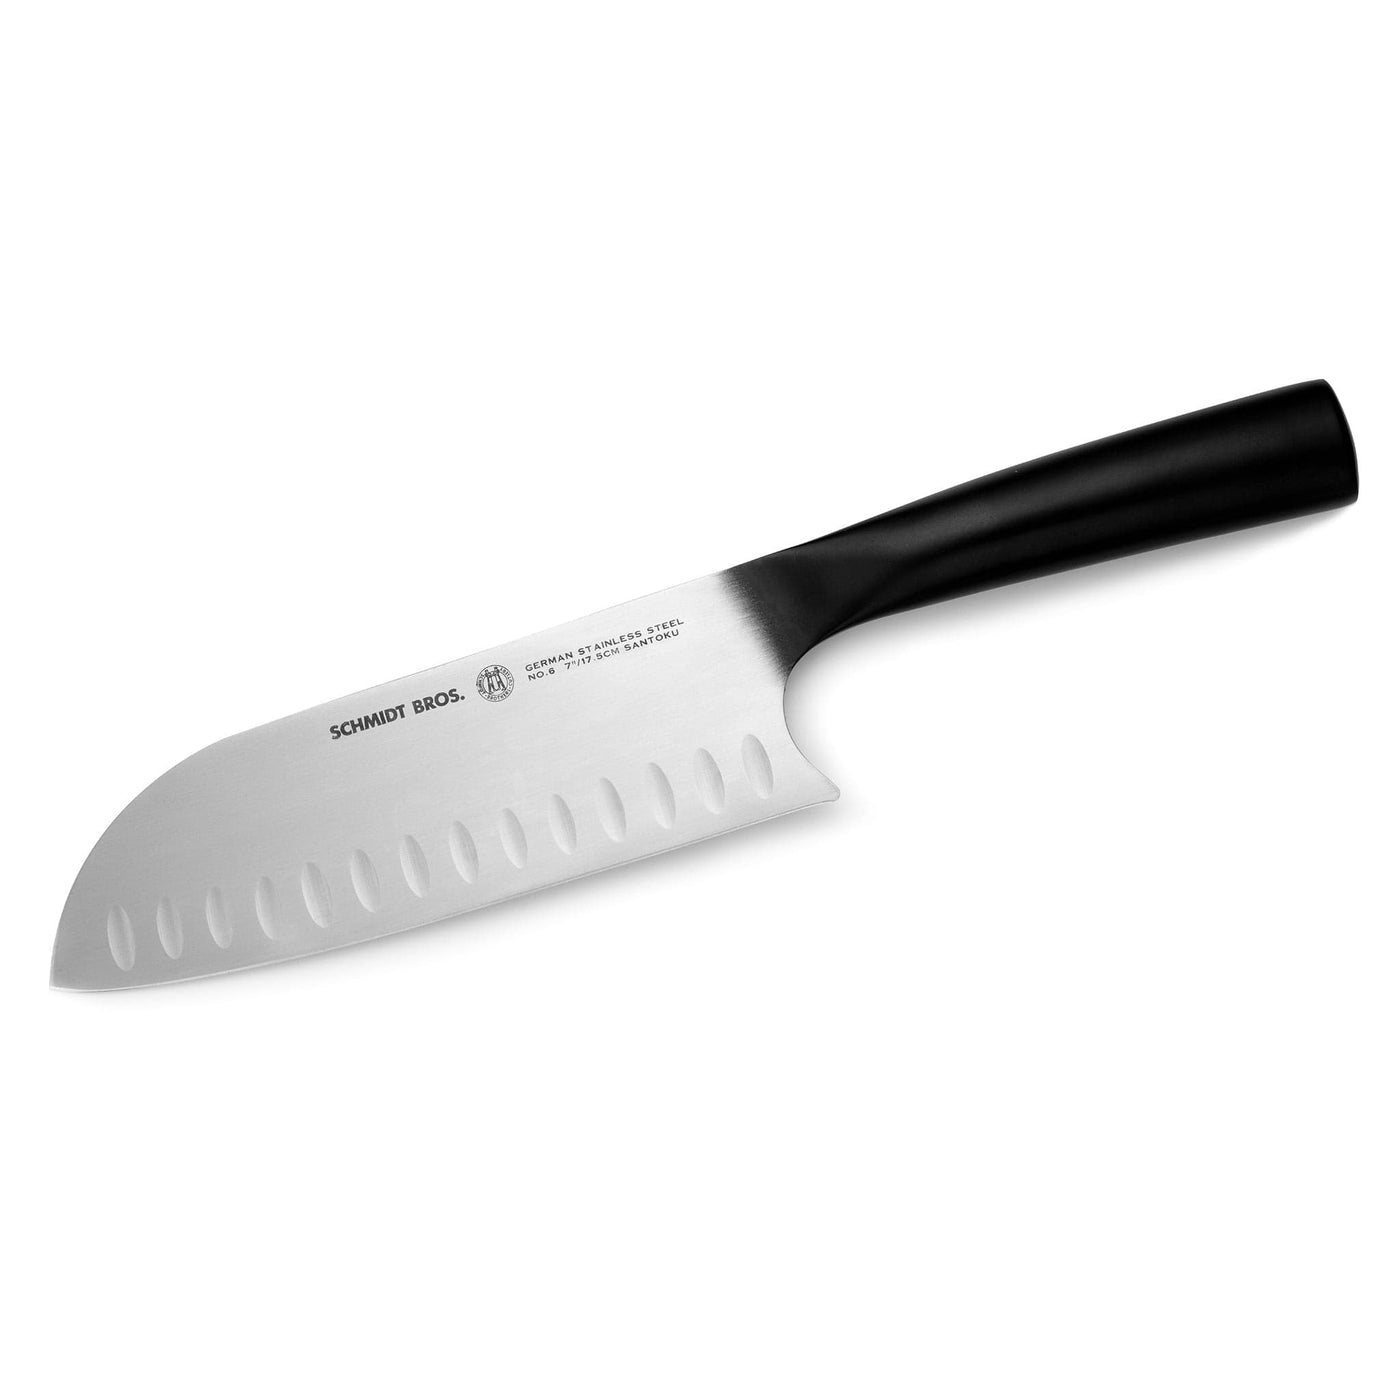 https://schmidtbrothers.com/cdn/shop/files/schmidt-brothers-kitchen-cutlery-schmidt-brothers-carbon-6-15-piece-knife-set-high-carbon-stainless-steel-cutlery-with-acacia-and-acrylic-magnetic-knife-block-and-knife-sharpener-3074_f294e699-76a7-4839-941e-0ef1010a59be_1400x.jpg?v=1684161457